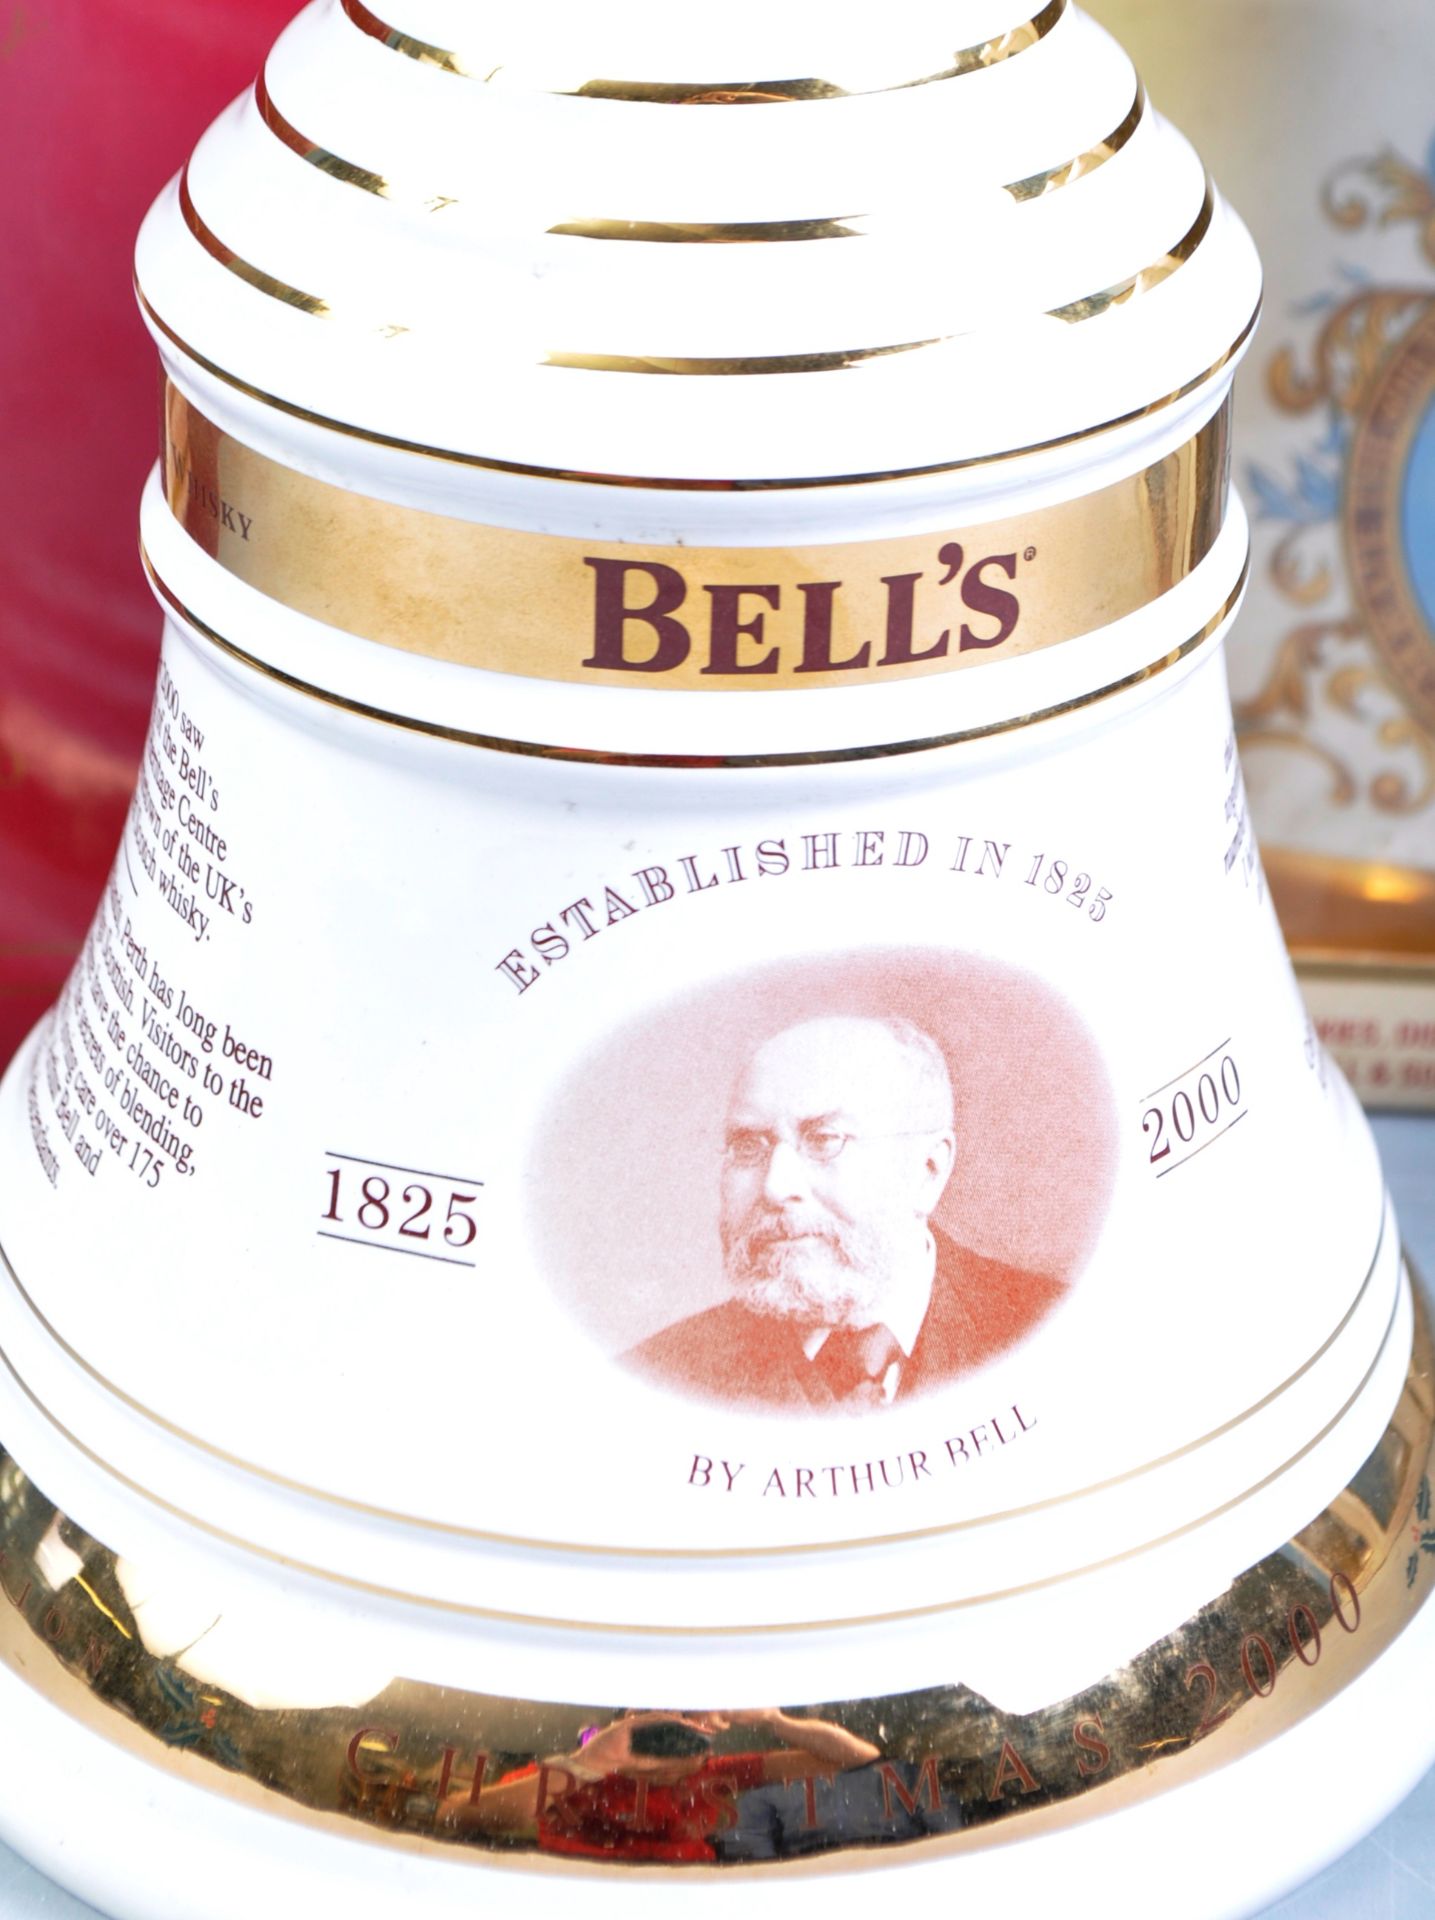 COLLECTION OF BELLS WHISKY COMMEMORATIVE DECANTERS - Image 3 of 3